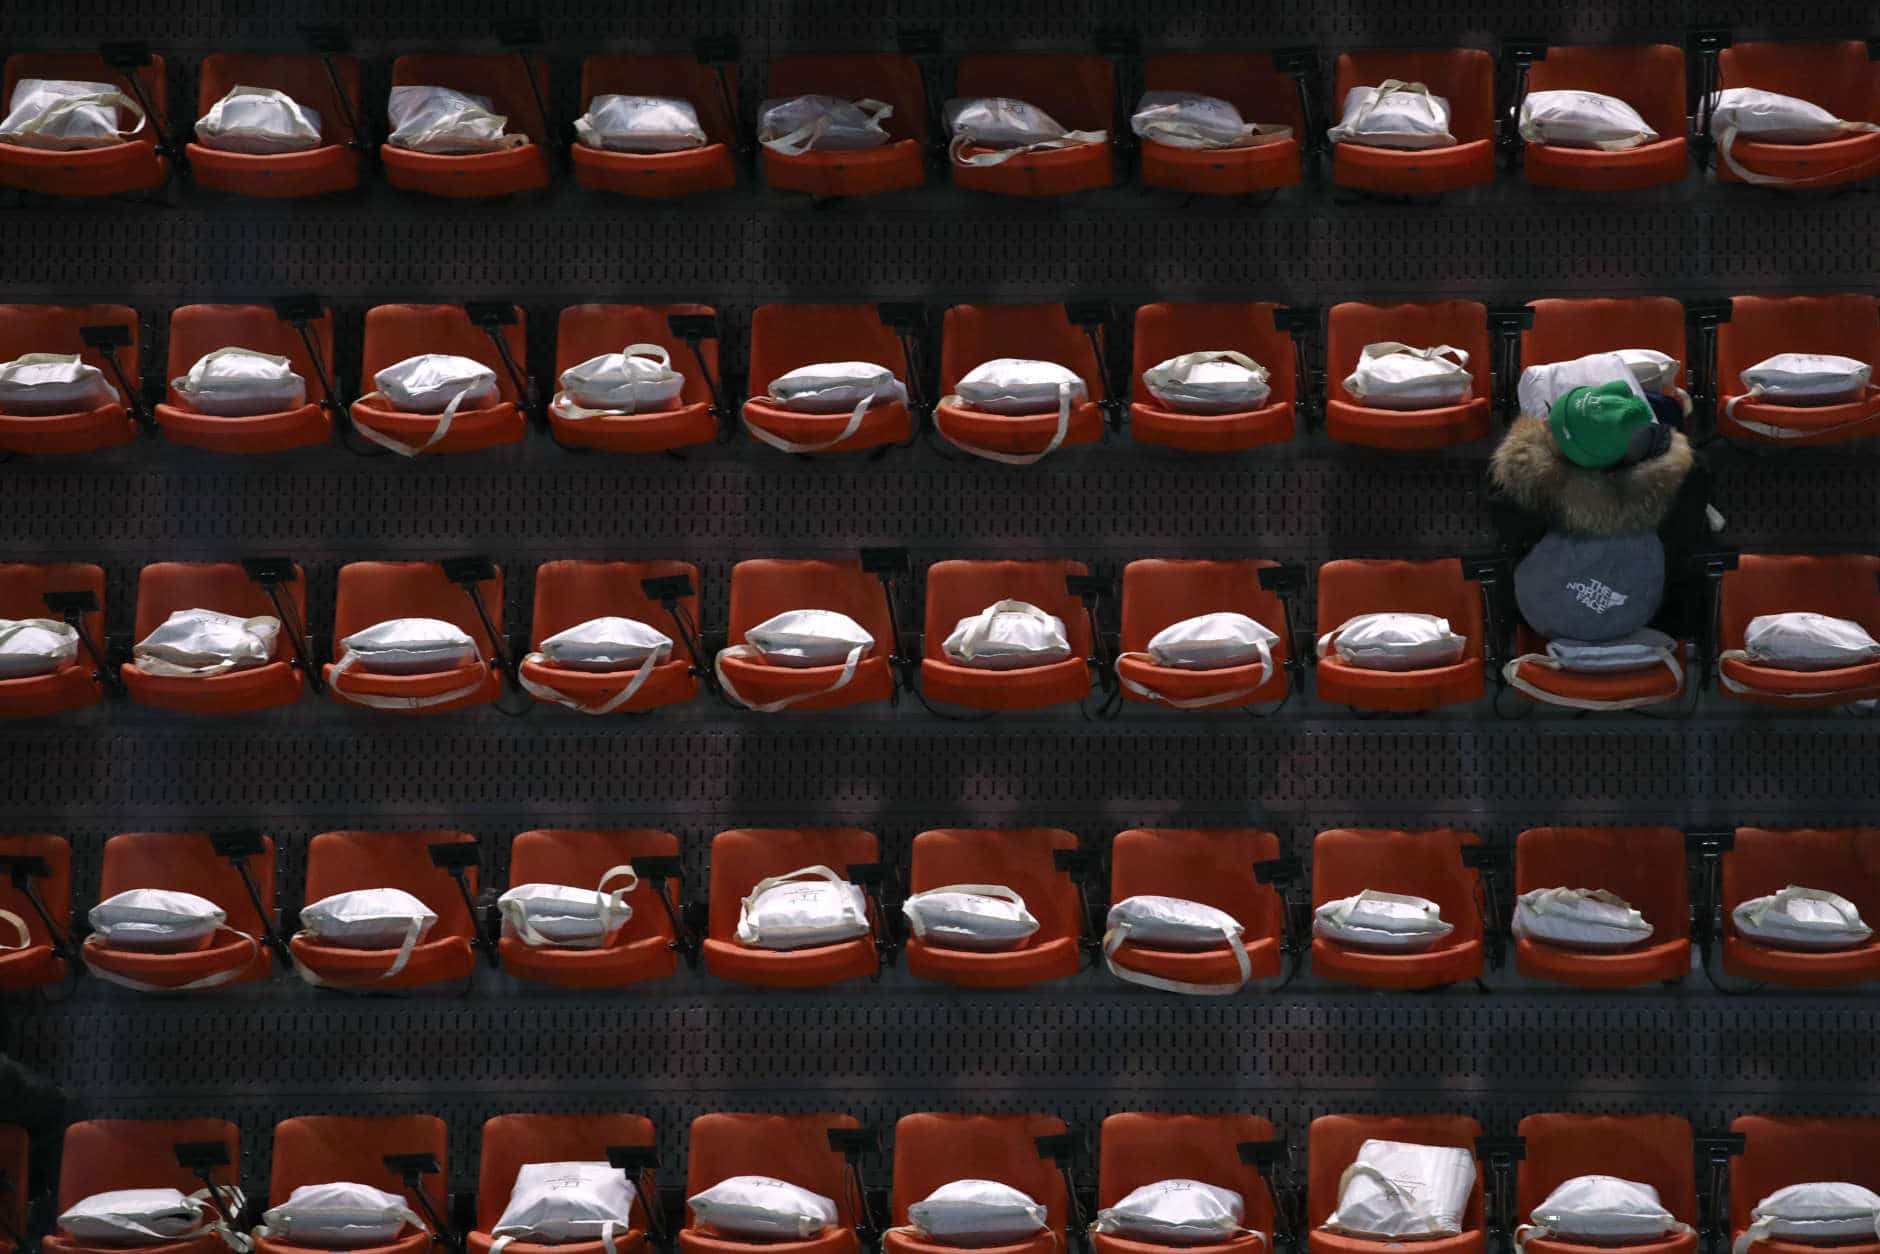 A spectator waits for the closing ceremony of the 2018 Winter Olympics to begin in Pyeongchang, South Korea, Sunday, Feb. 25, 2018. (AP Photo/Charlie Riedel)